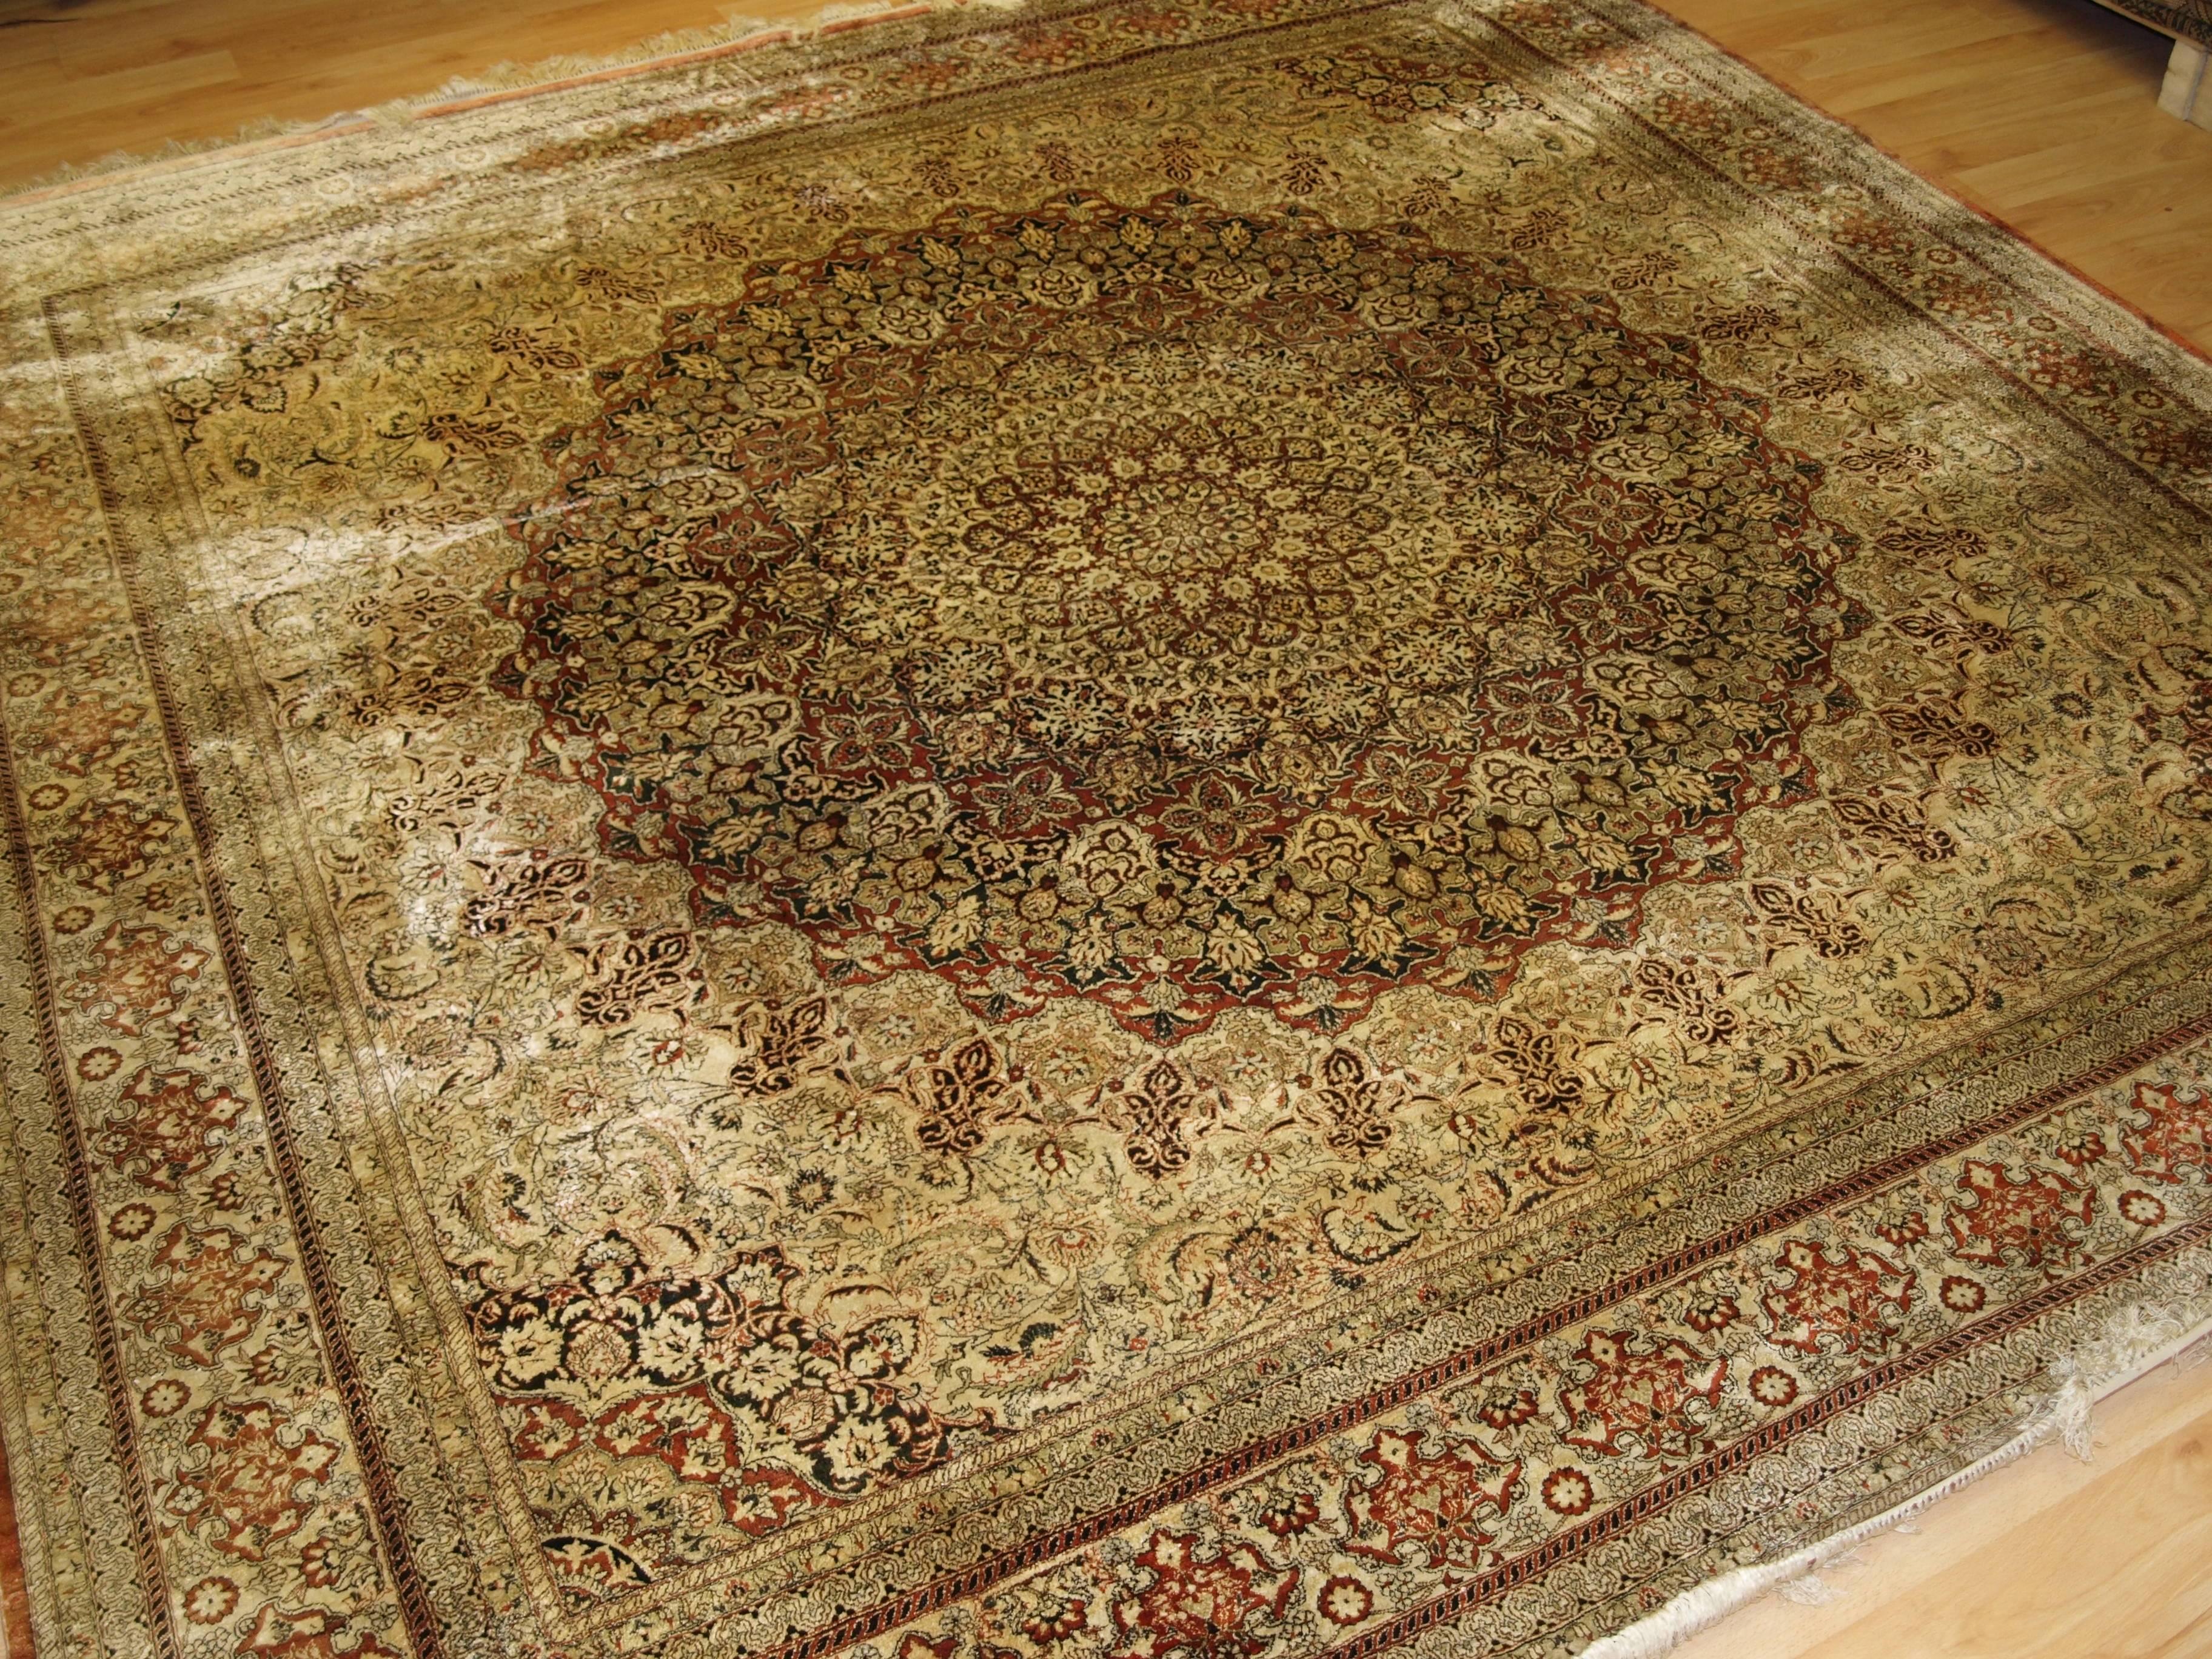 Size: 8 ft 2 in x 8 ft 1 in (250 x 248 cm).

A really beautiful example of a Chinese silk rug in the Turkish Hereke style with a very classical medallion design. 

About 20 years old.

The rug is of fine weave and superbly drawn; clearly a rug